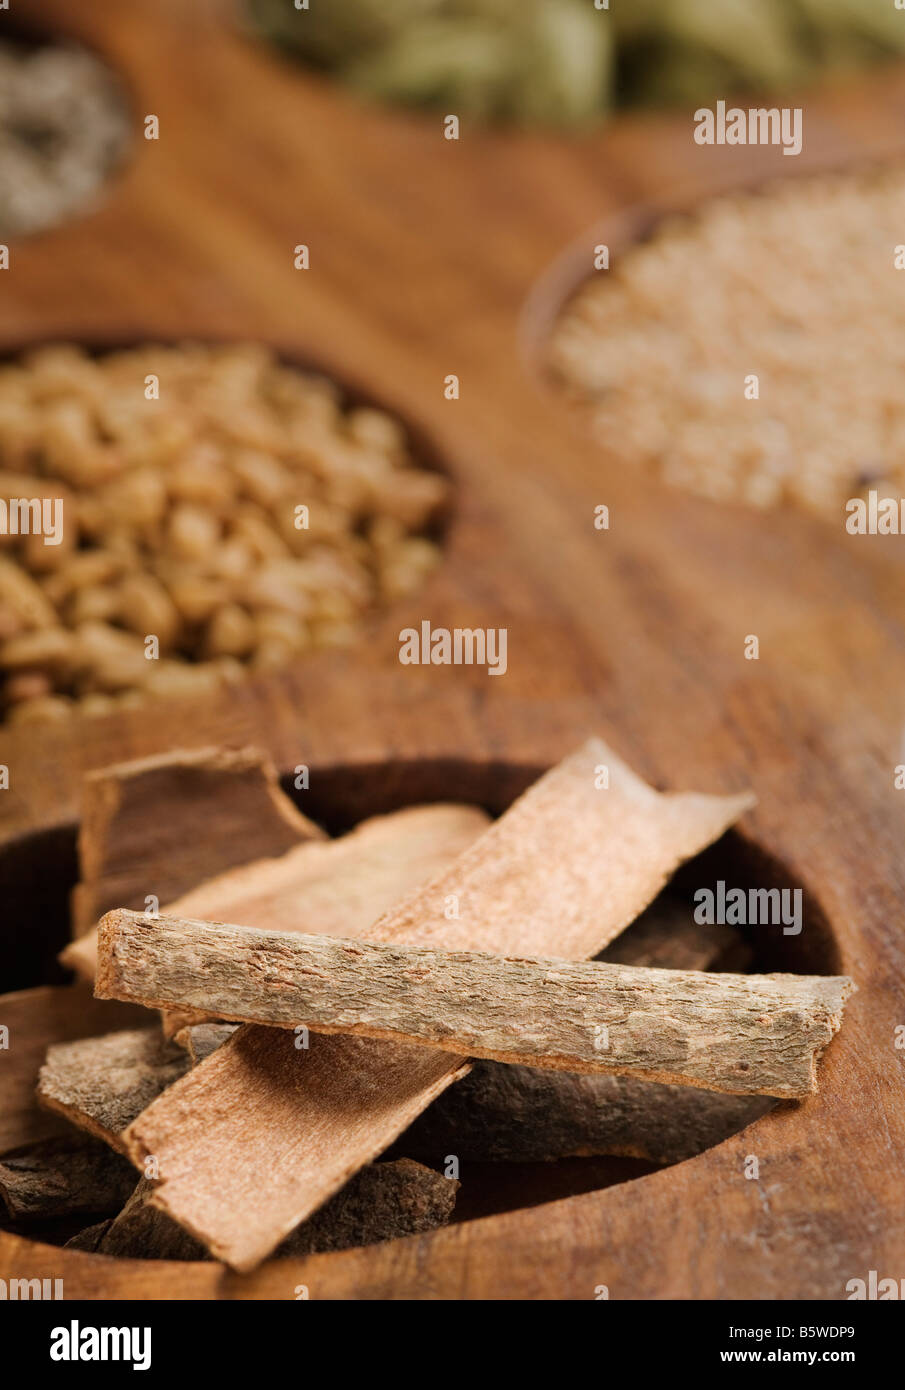 Close-up of cinnamon bark in a spice container Stock Photo